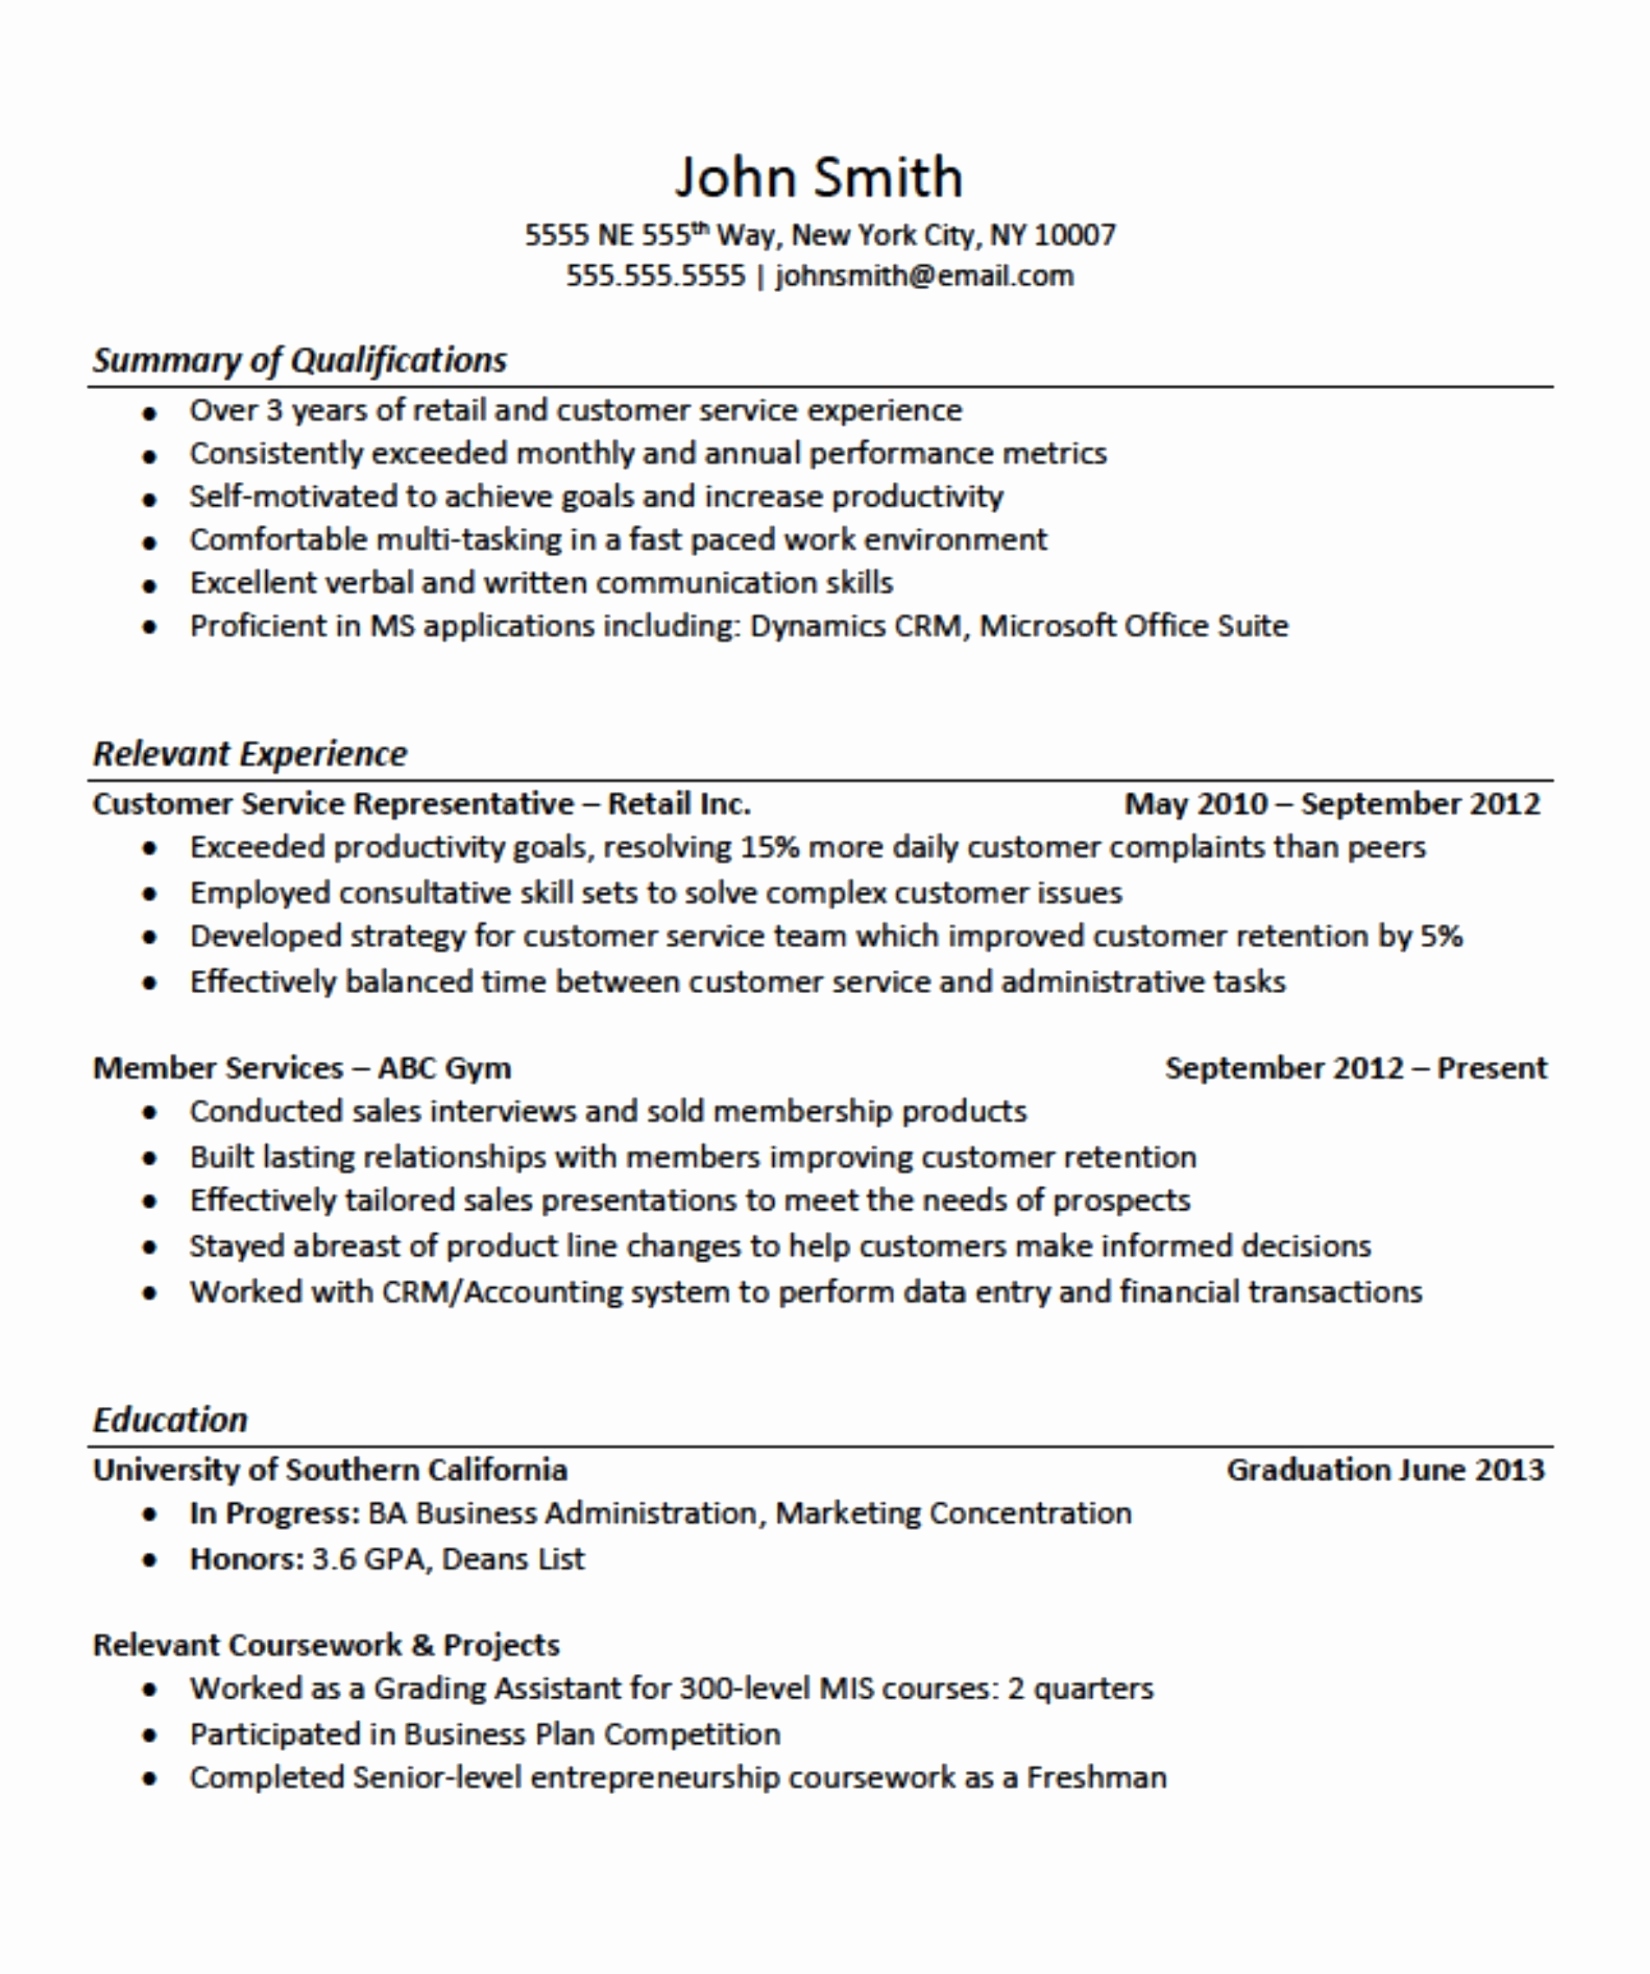 Resume Format For 5 Years Experience In Sales 